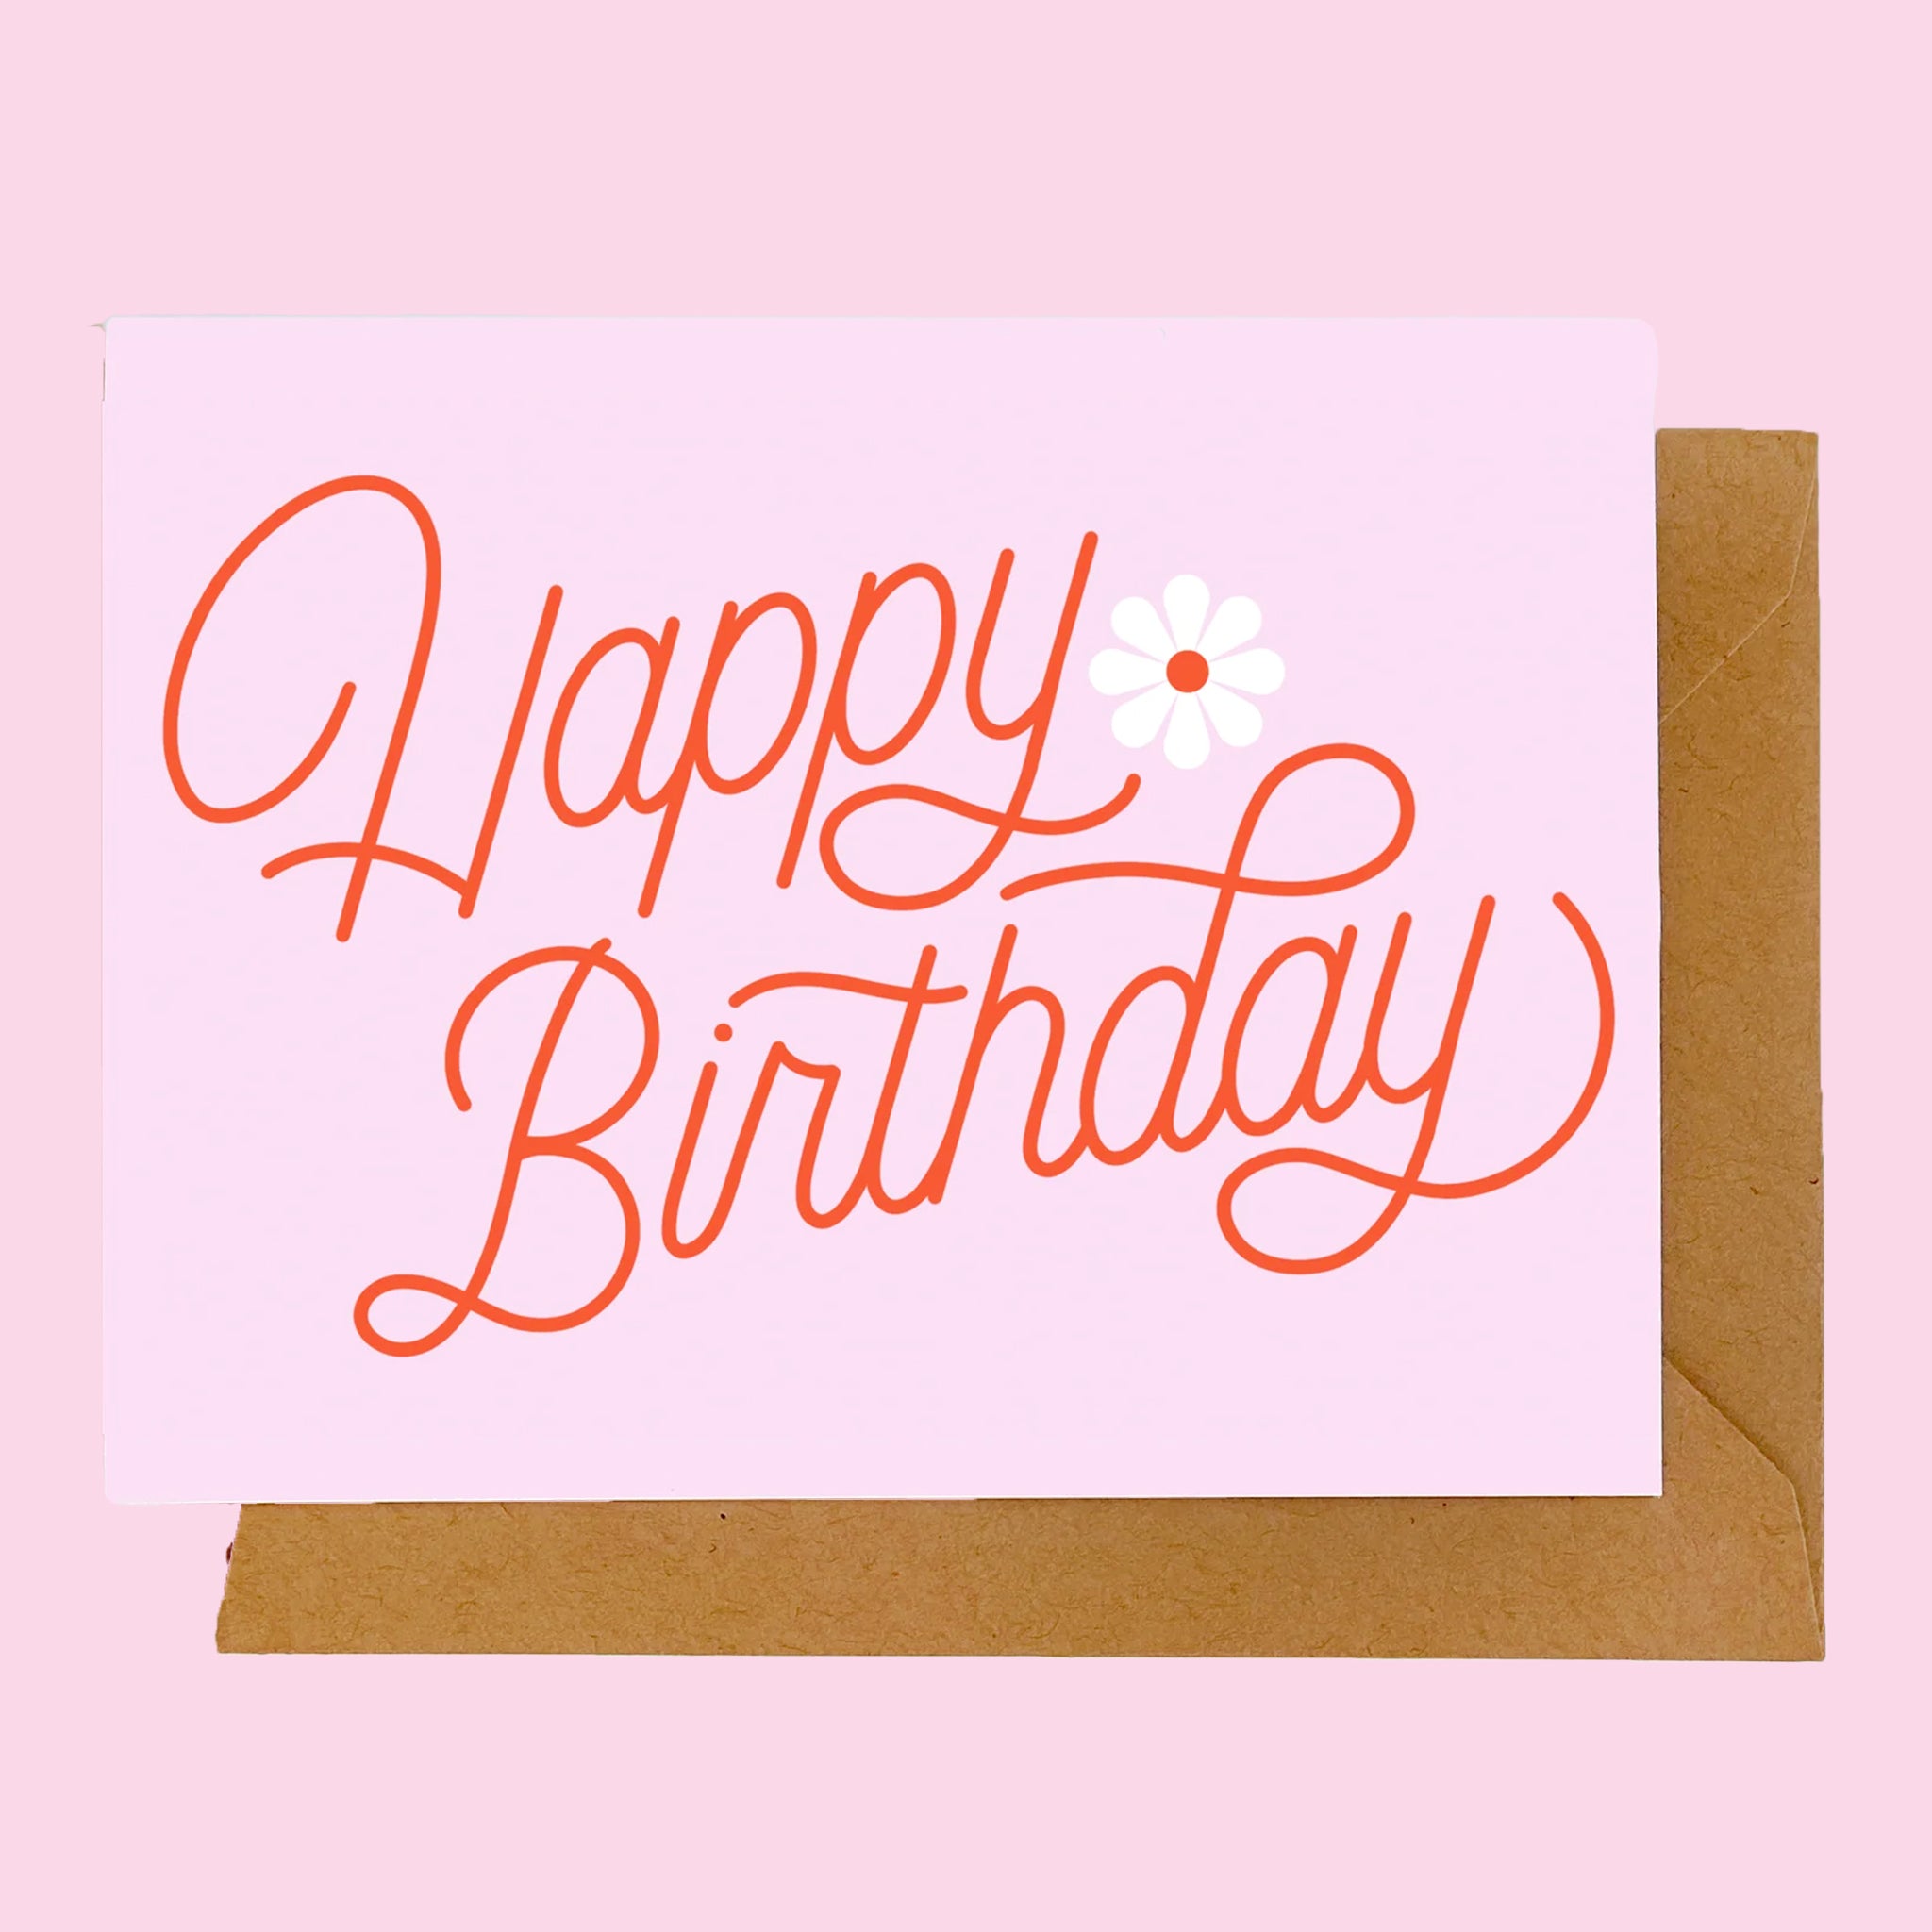 On a pink background is a pink card with red cursive text that reads, "Happy Birthday" with a graphic of a daisy on the side. 